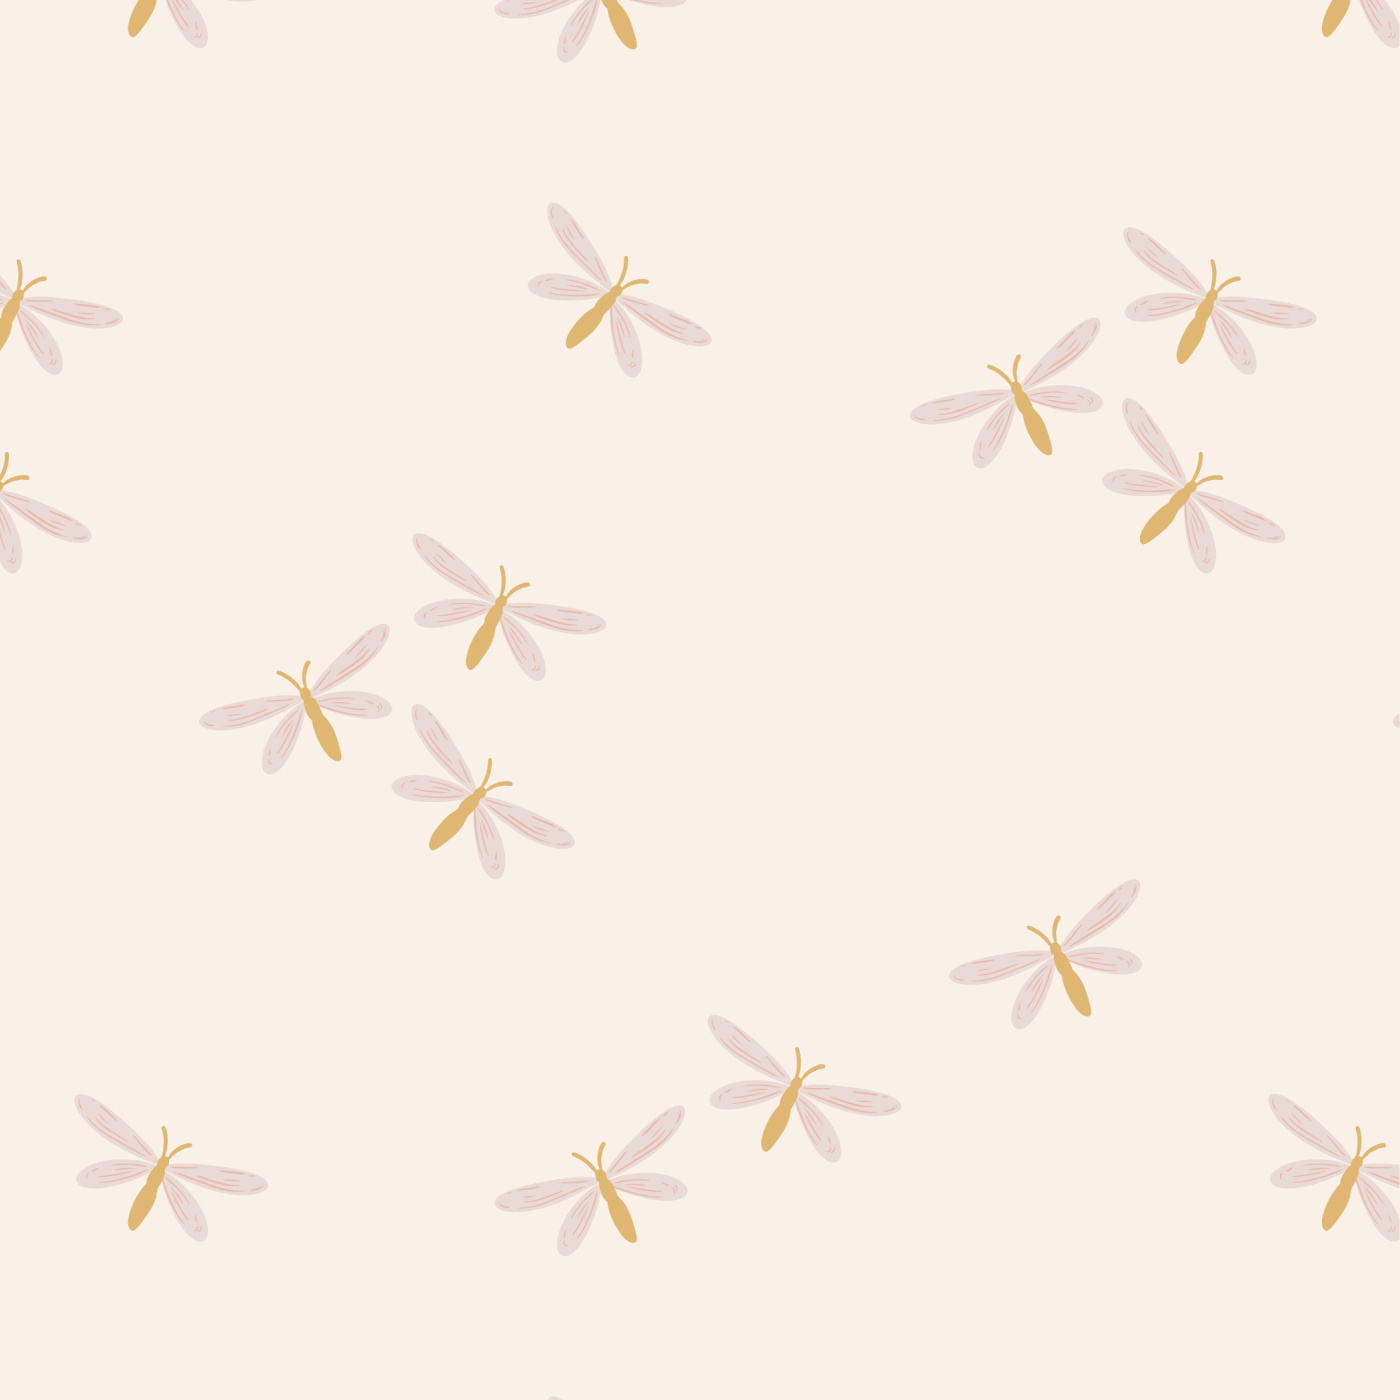 Dragonfly Babies Peel and Stick Removable Wallpaper | Love vs. Design